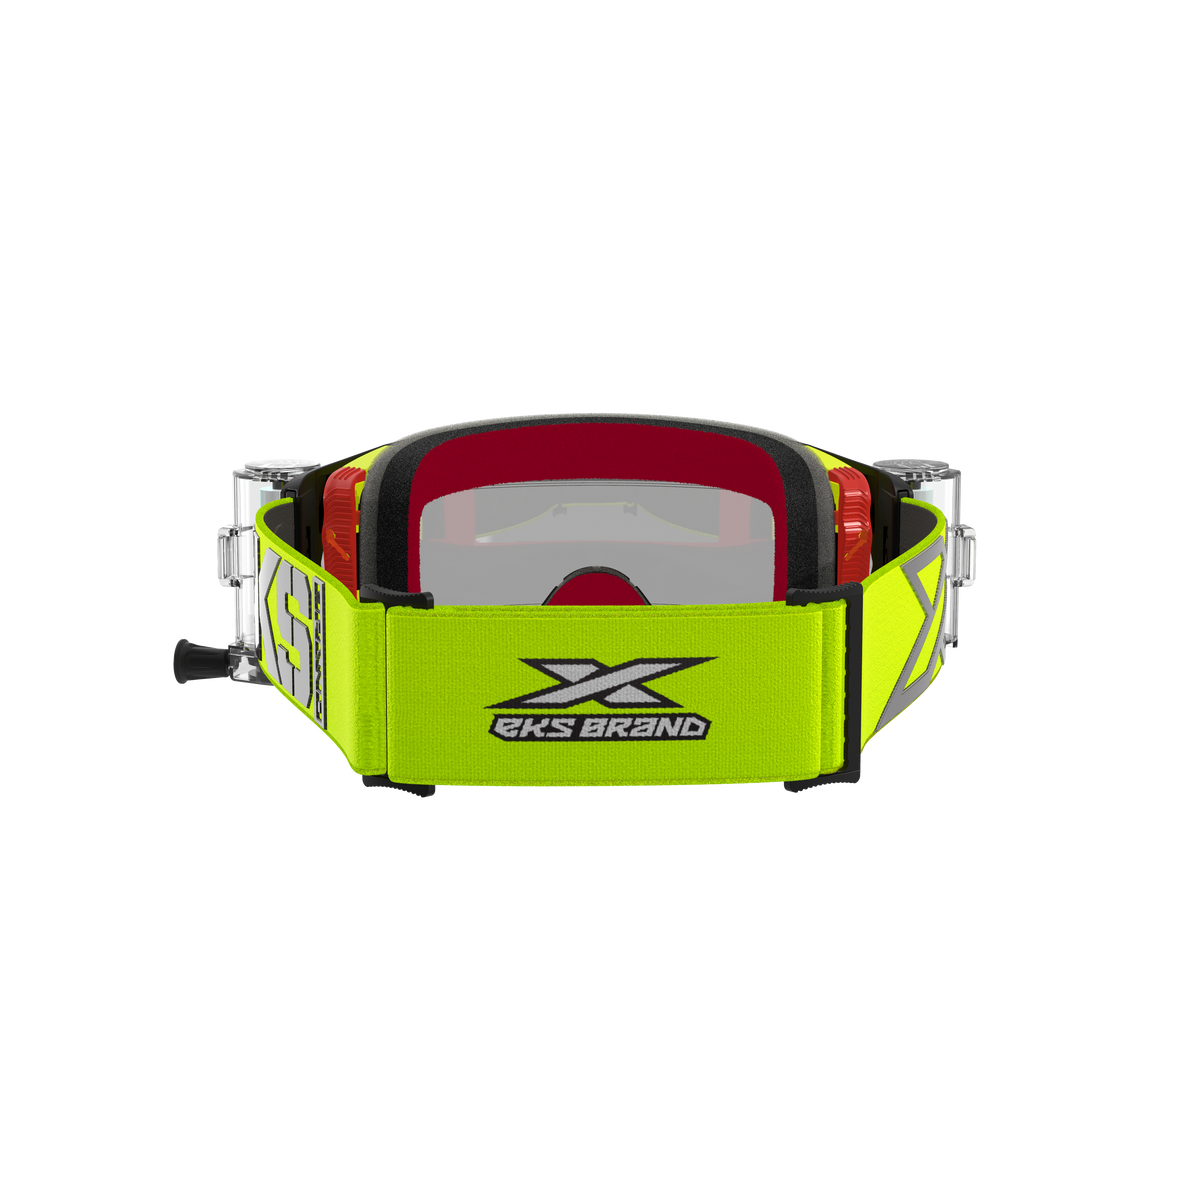 Lucid Goggle Race Pack Flo Yellow, Black - Zip Off